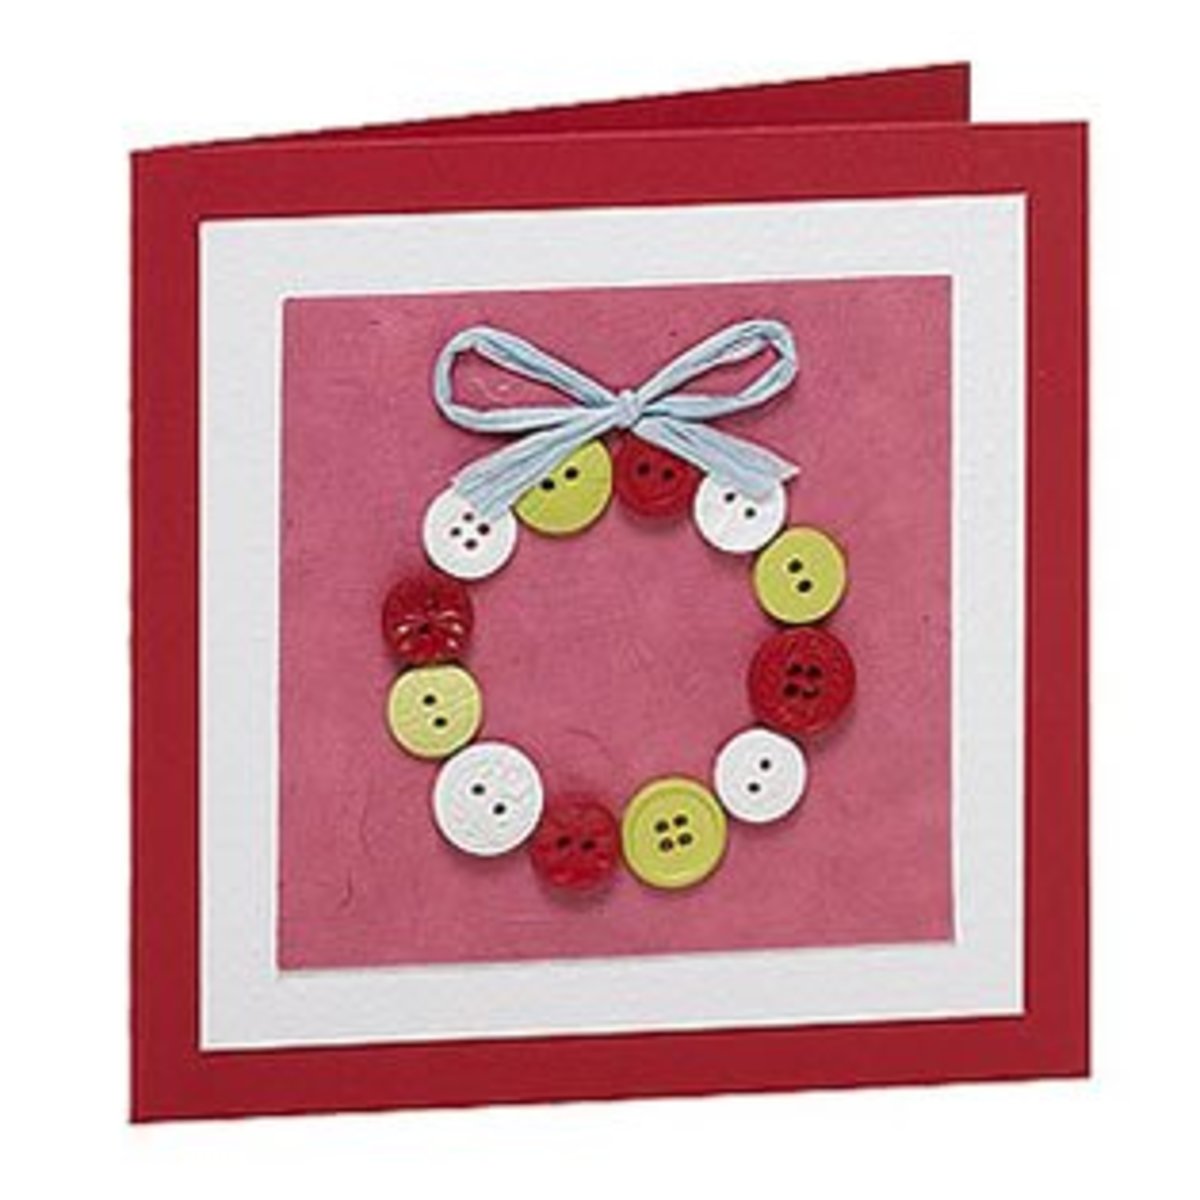 button-wreath-craft-holiday-decorations